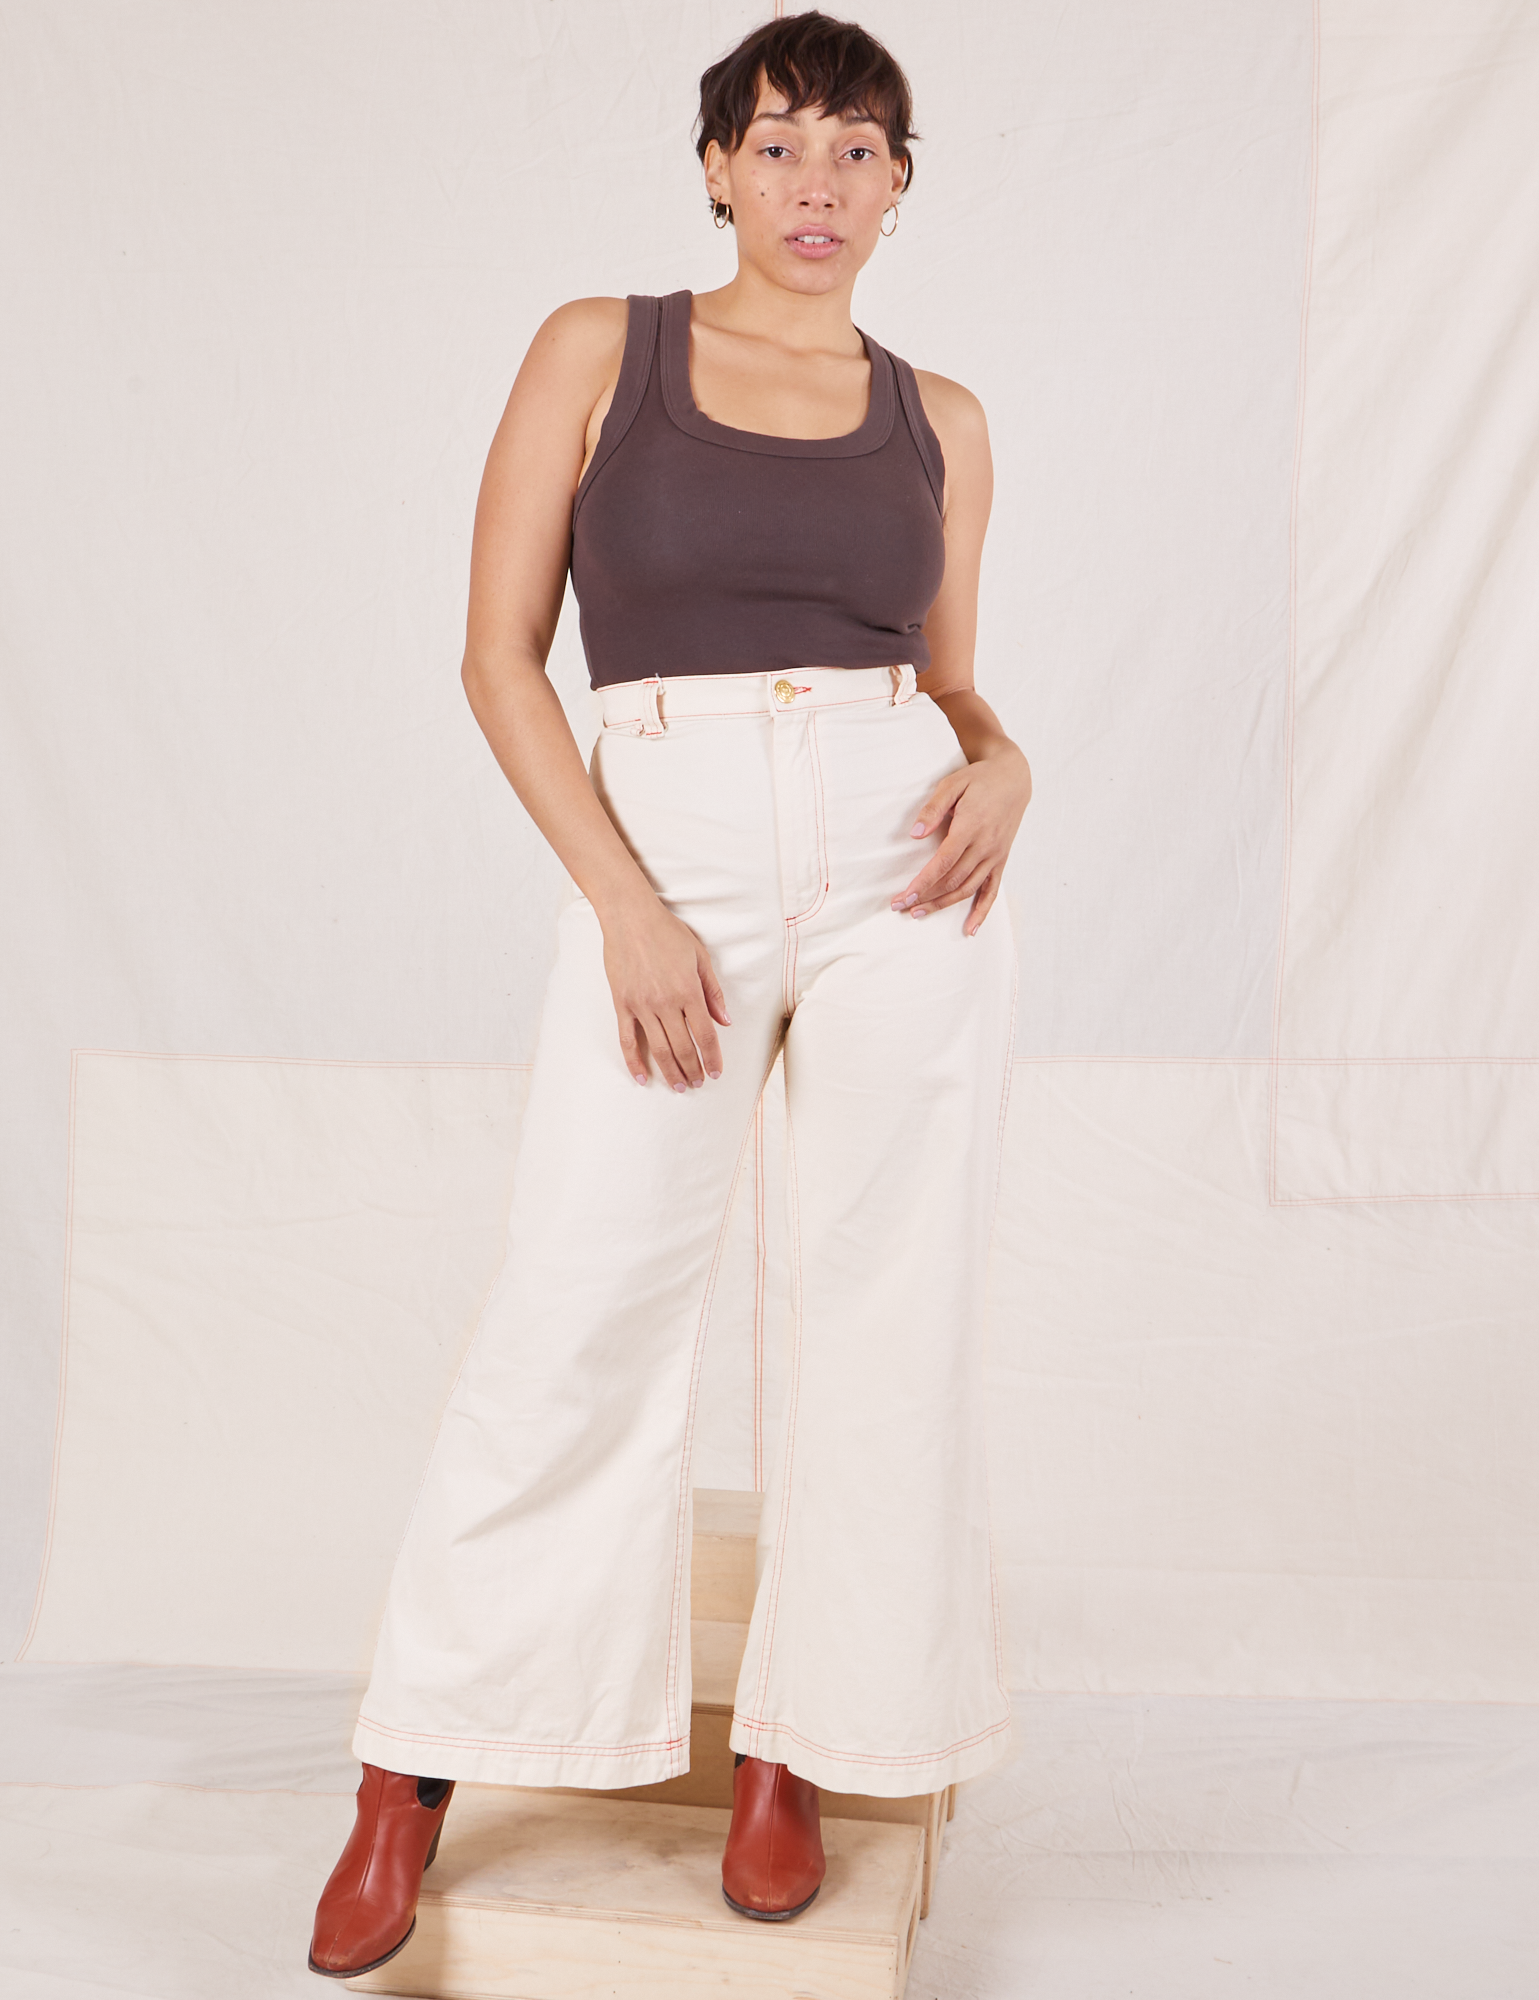 Tiara is 5&#39;4&quot; and wearing XS Bell Bottoms in Vintage Off-White paired with espresso brown Tank Top